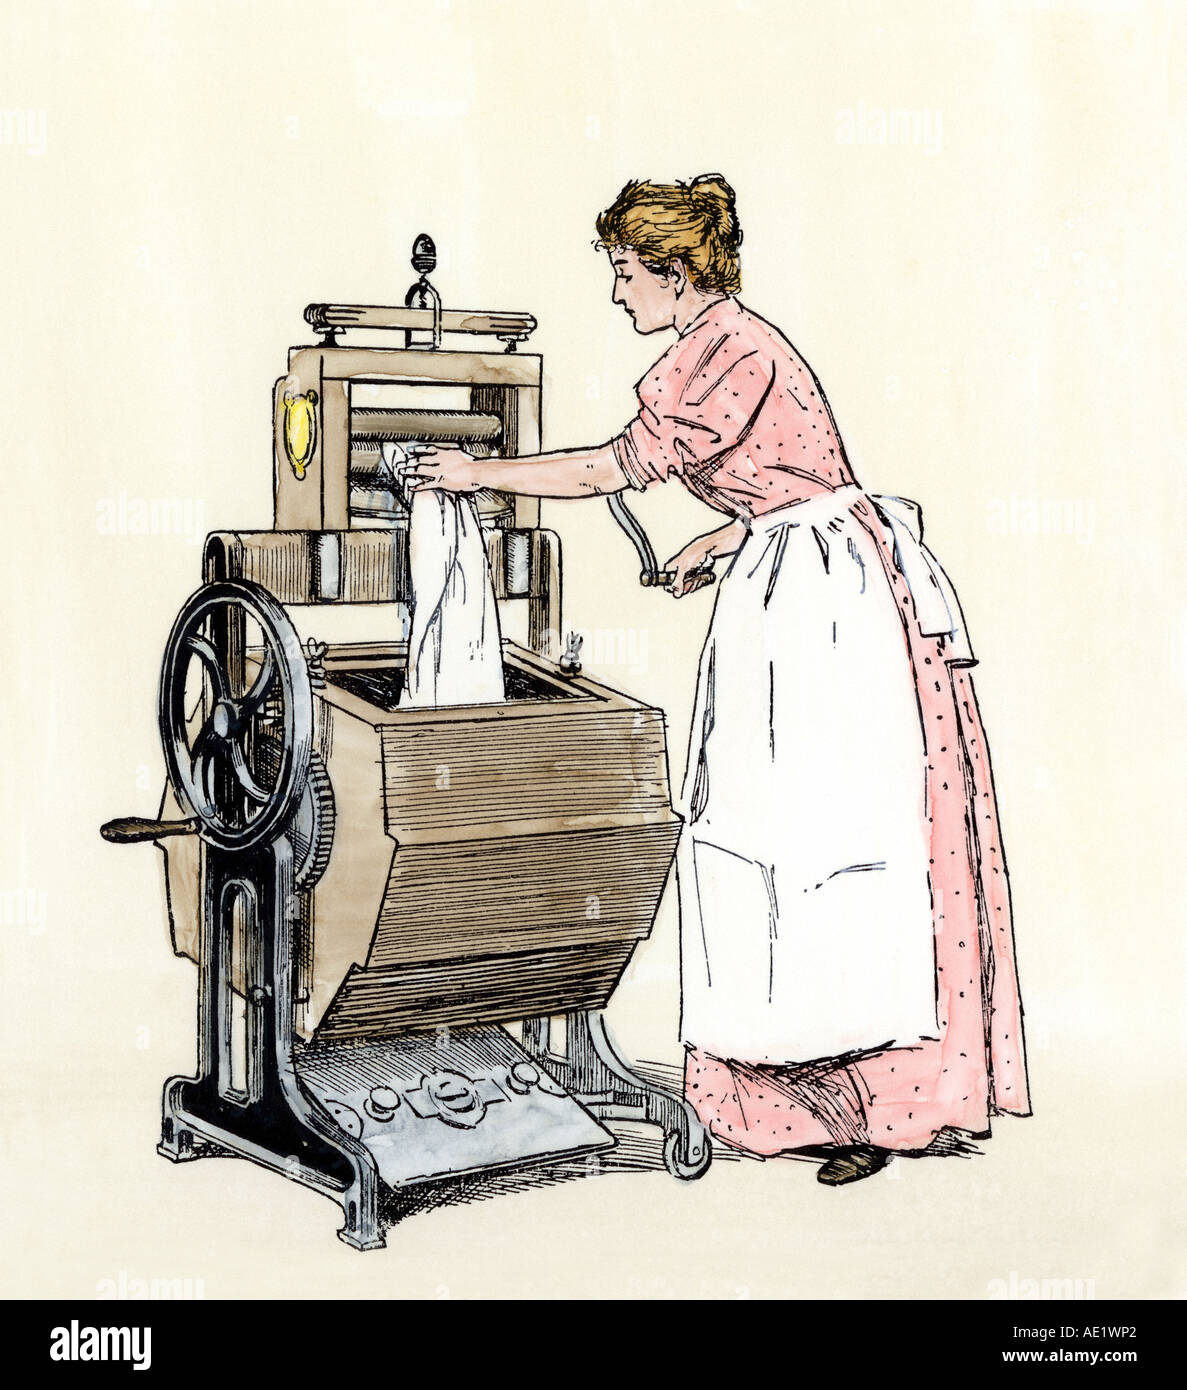 Woman using the new Bradford Vowel washing machine with an Acorn wringer circa 1900. Hand-colored woodcut Stock Photo